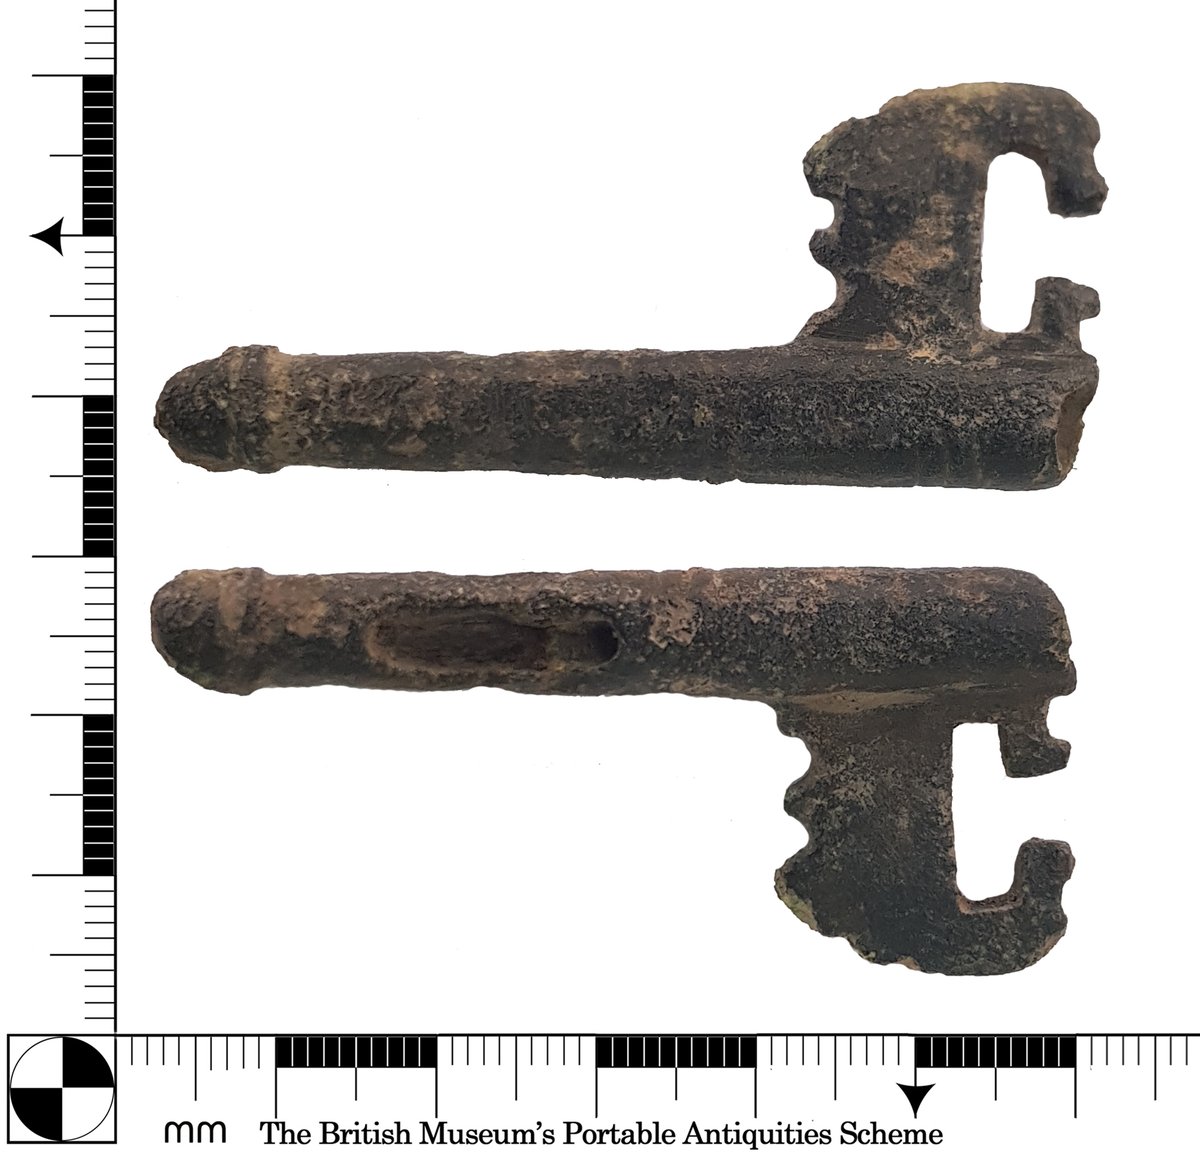 Locks and keys are symbolic of personal property, control and exclusion, so they are interesting items to record and study. This example is a medieval rotary key dating from c. AD 1200-1500. finds.org.uk/database/artef… #FindsFriday